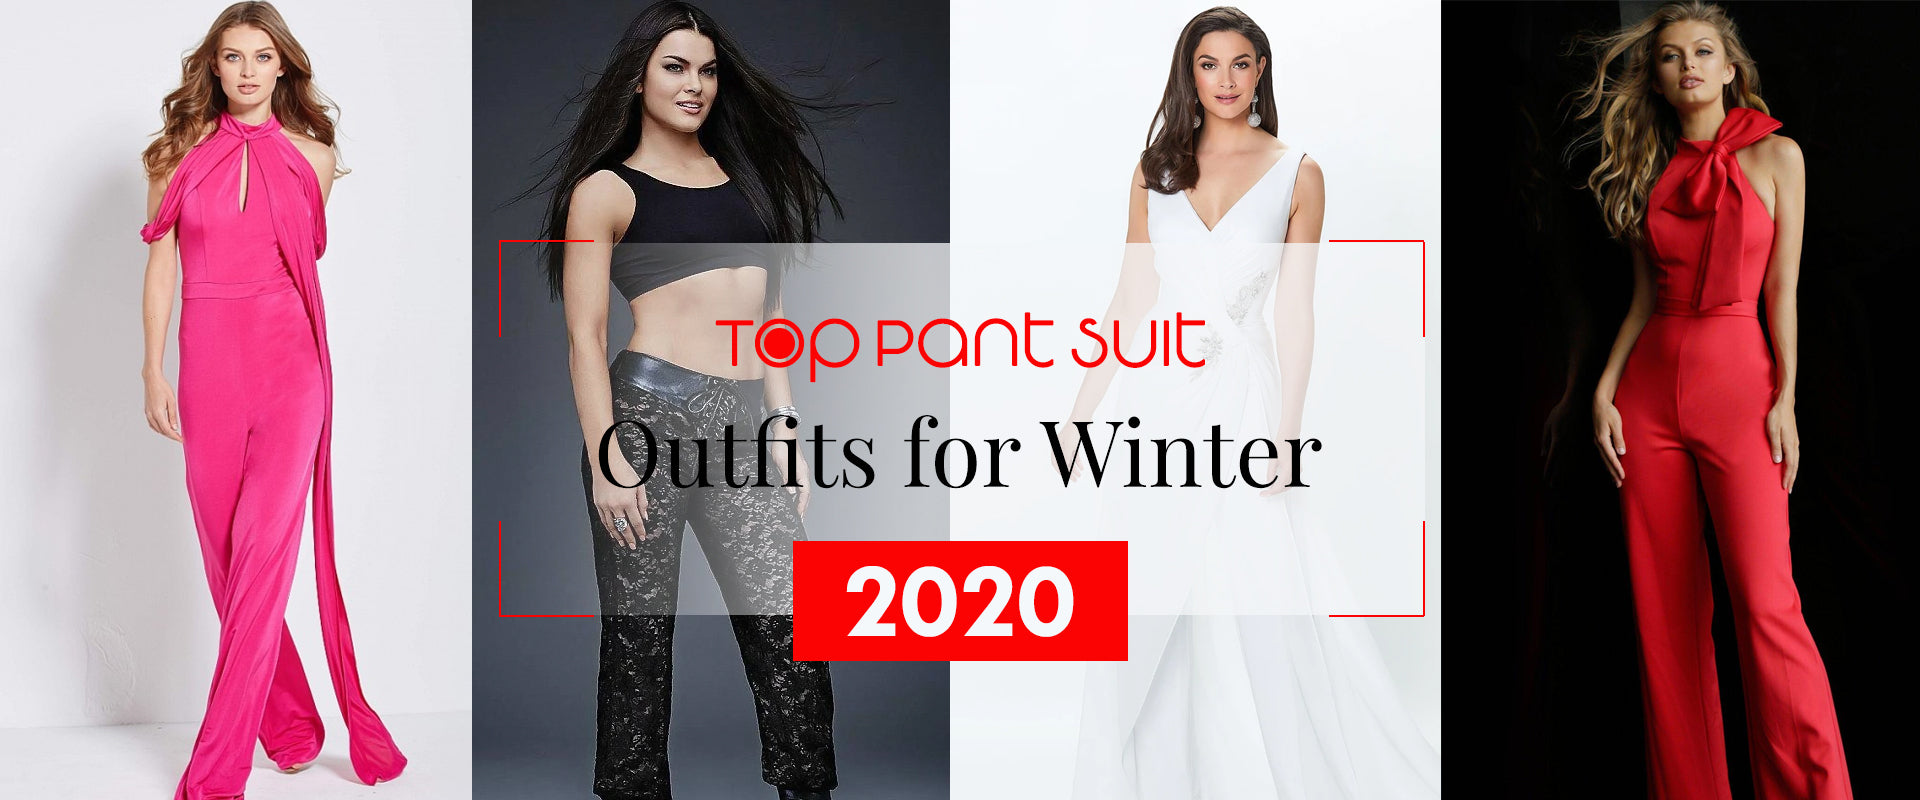 Stunning Pant Suit Outfit Ideas to Don this Winter